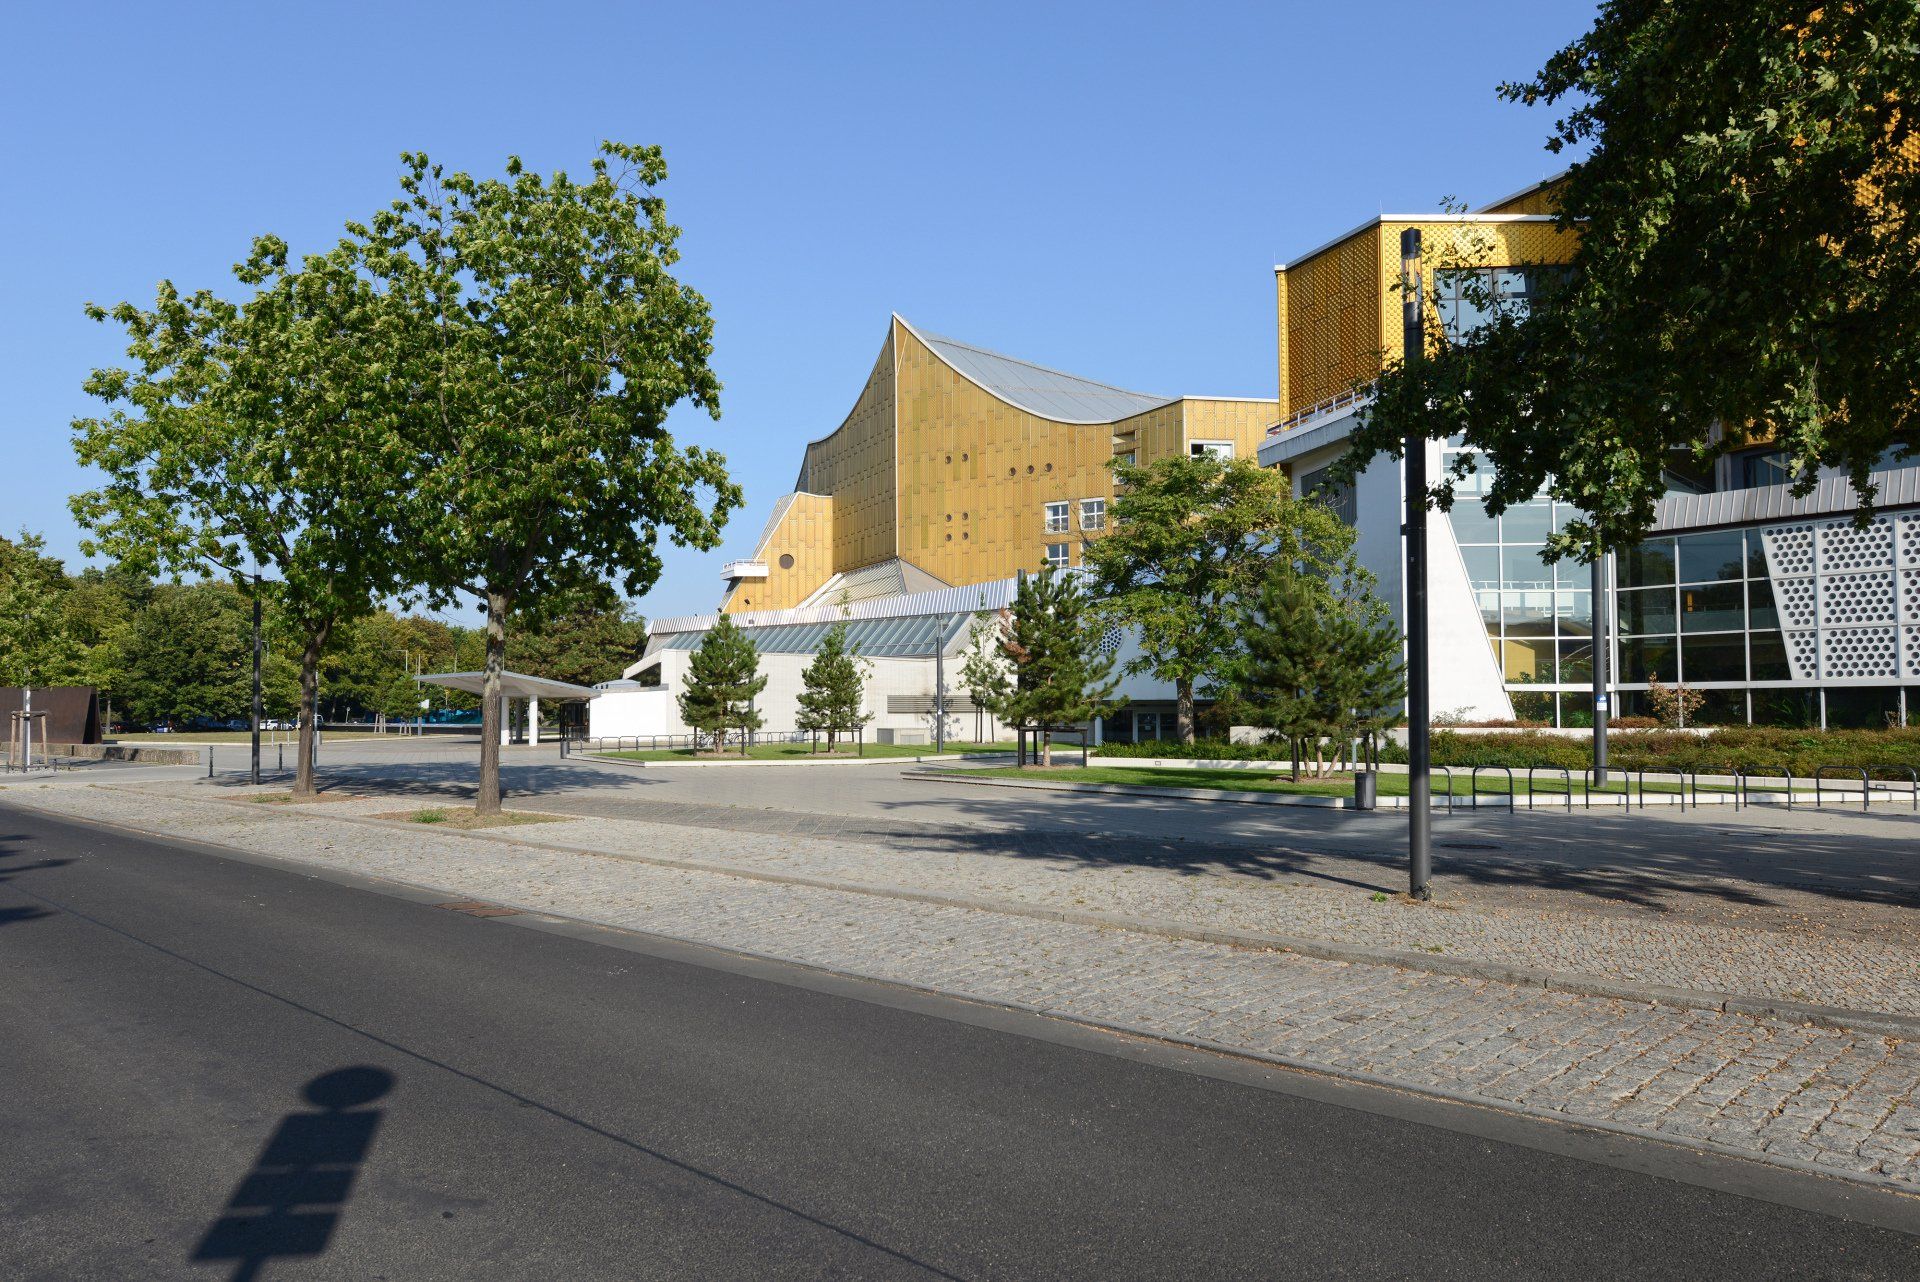 West side of the orchestra-building Philharmonie, September 2020